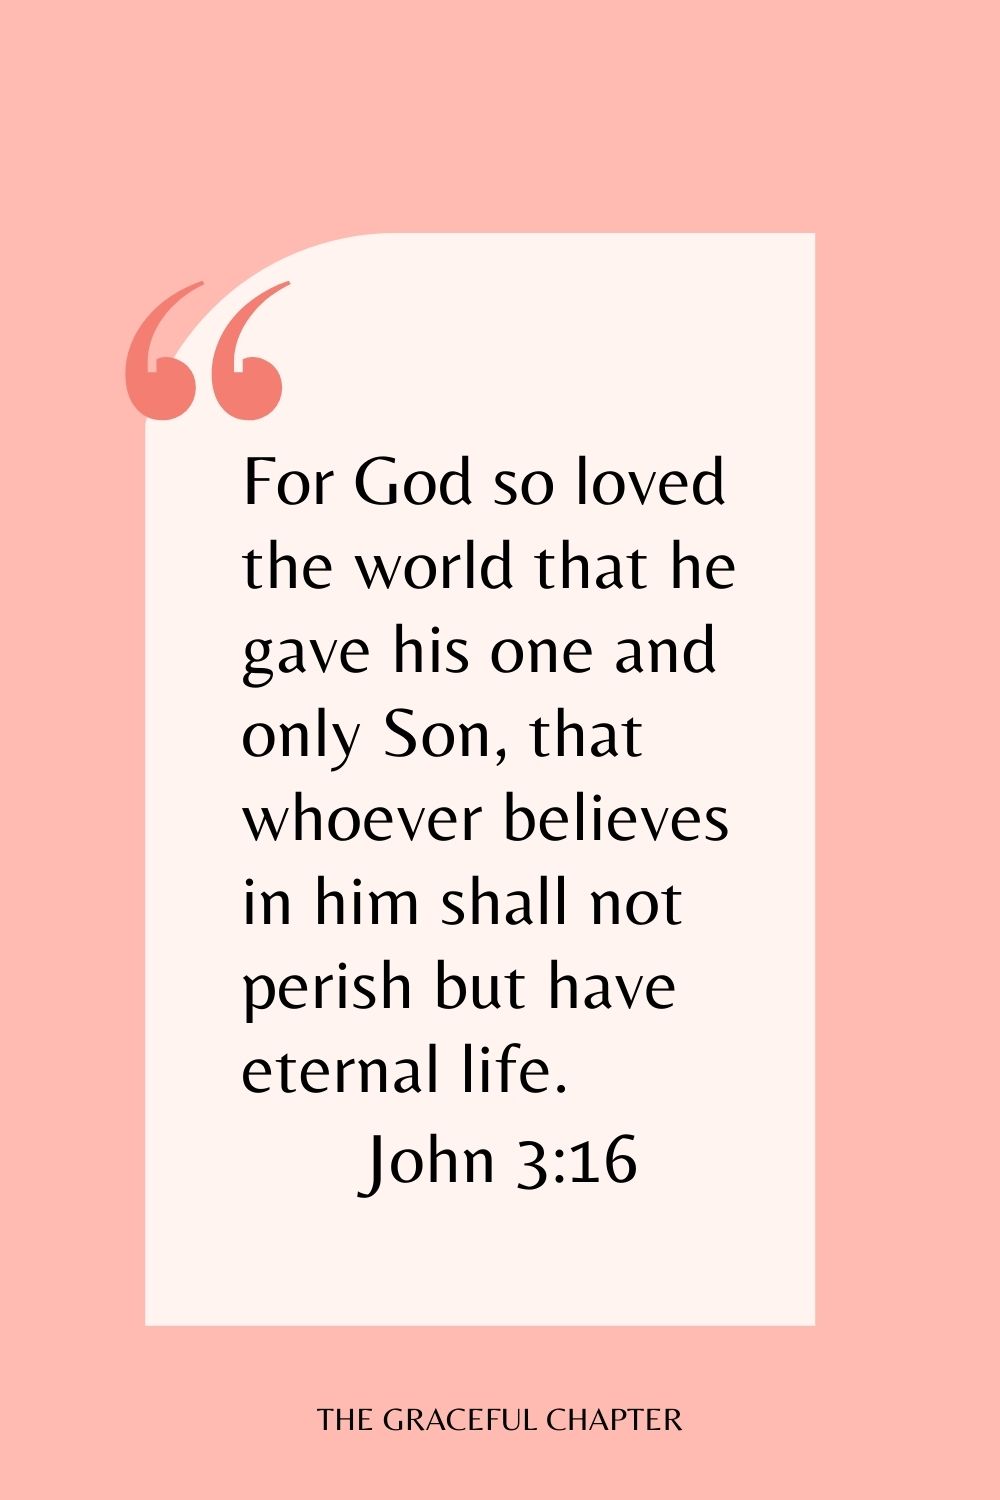 For God so loved the world that he gave his one and only Son, that whoever believes in him shall not perish but have eternal life. John 3:16